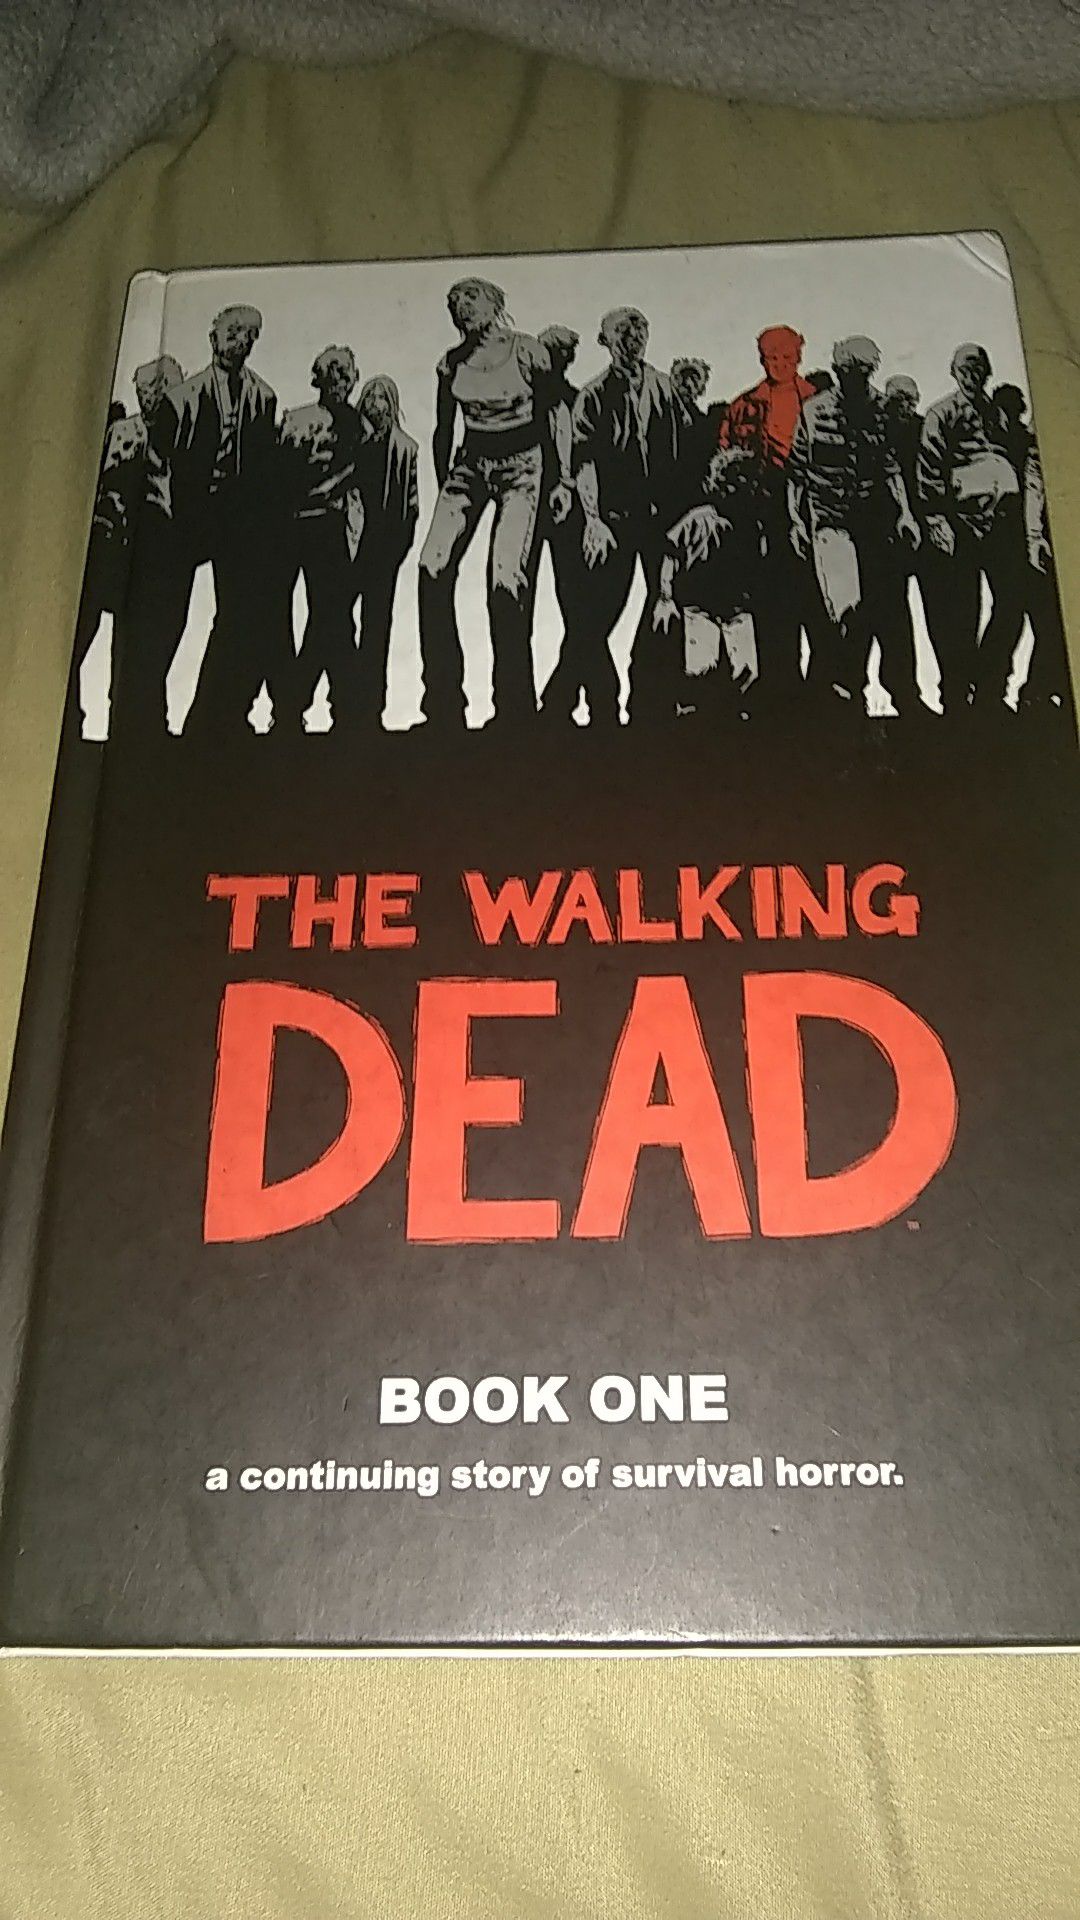 The walking dead book one